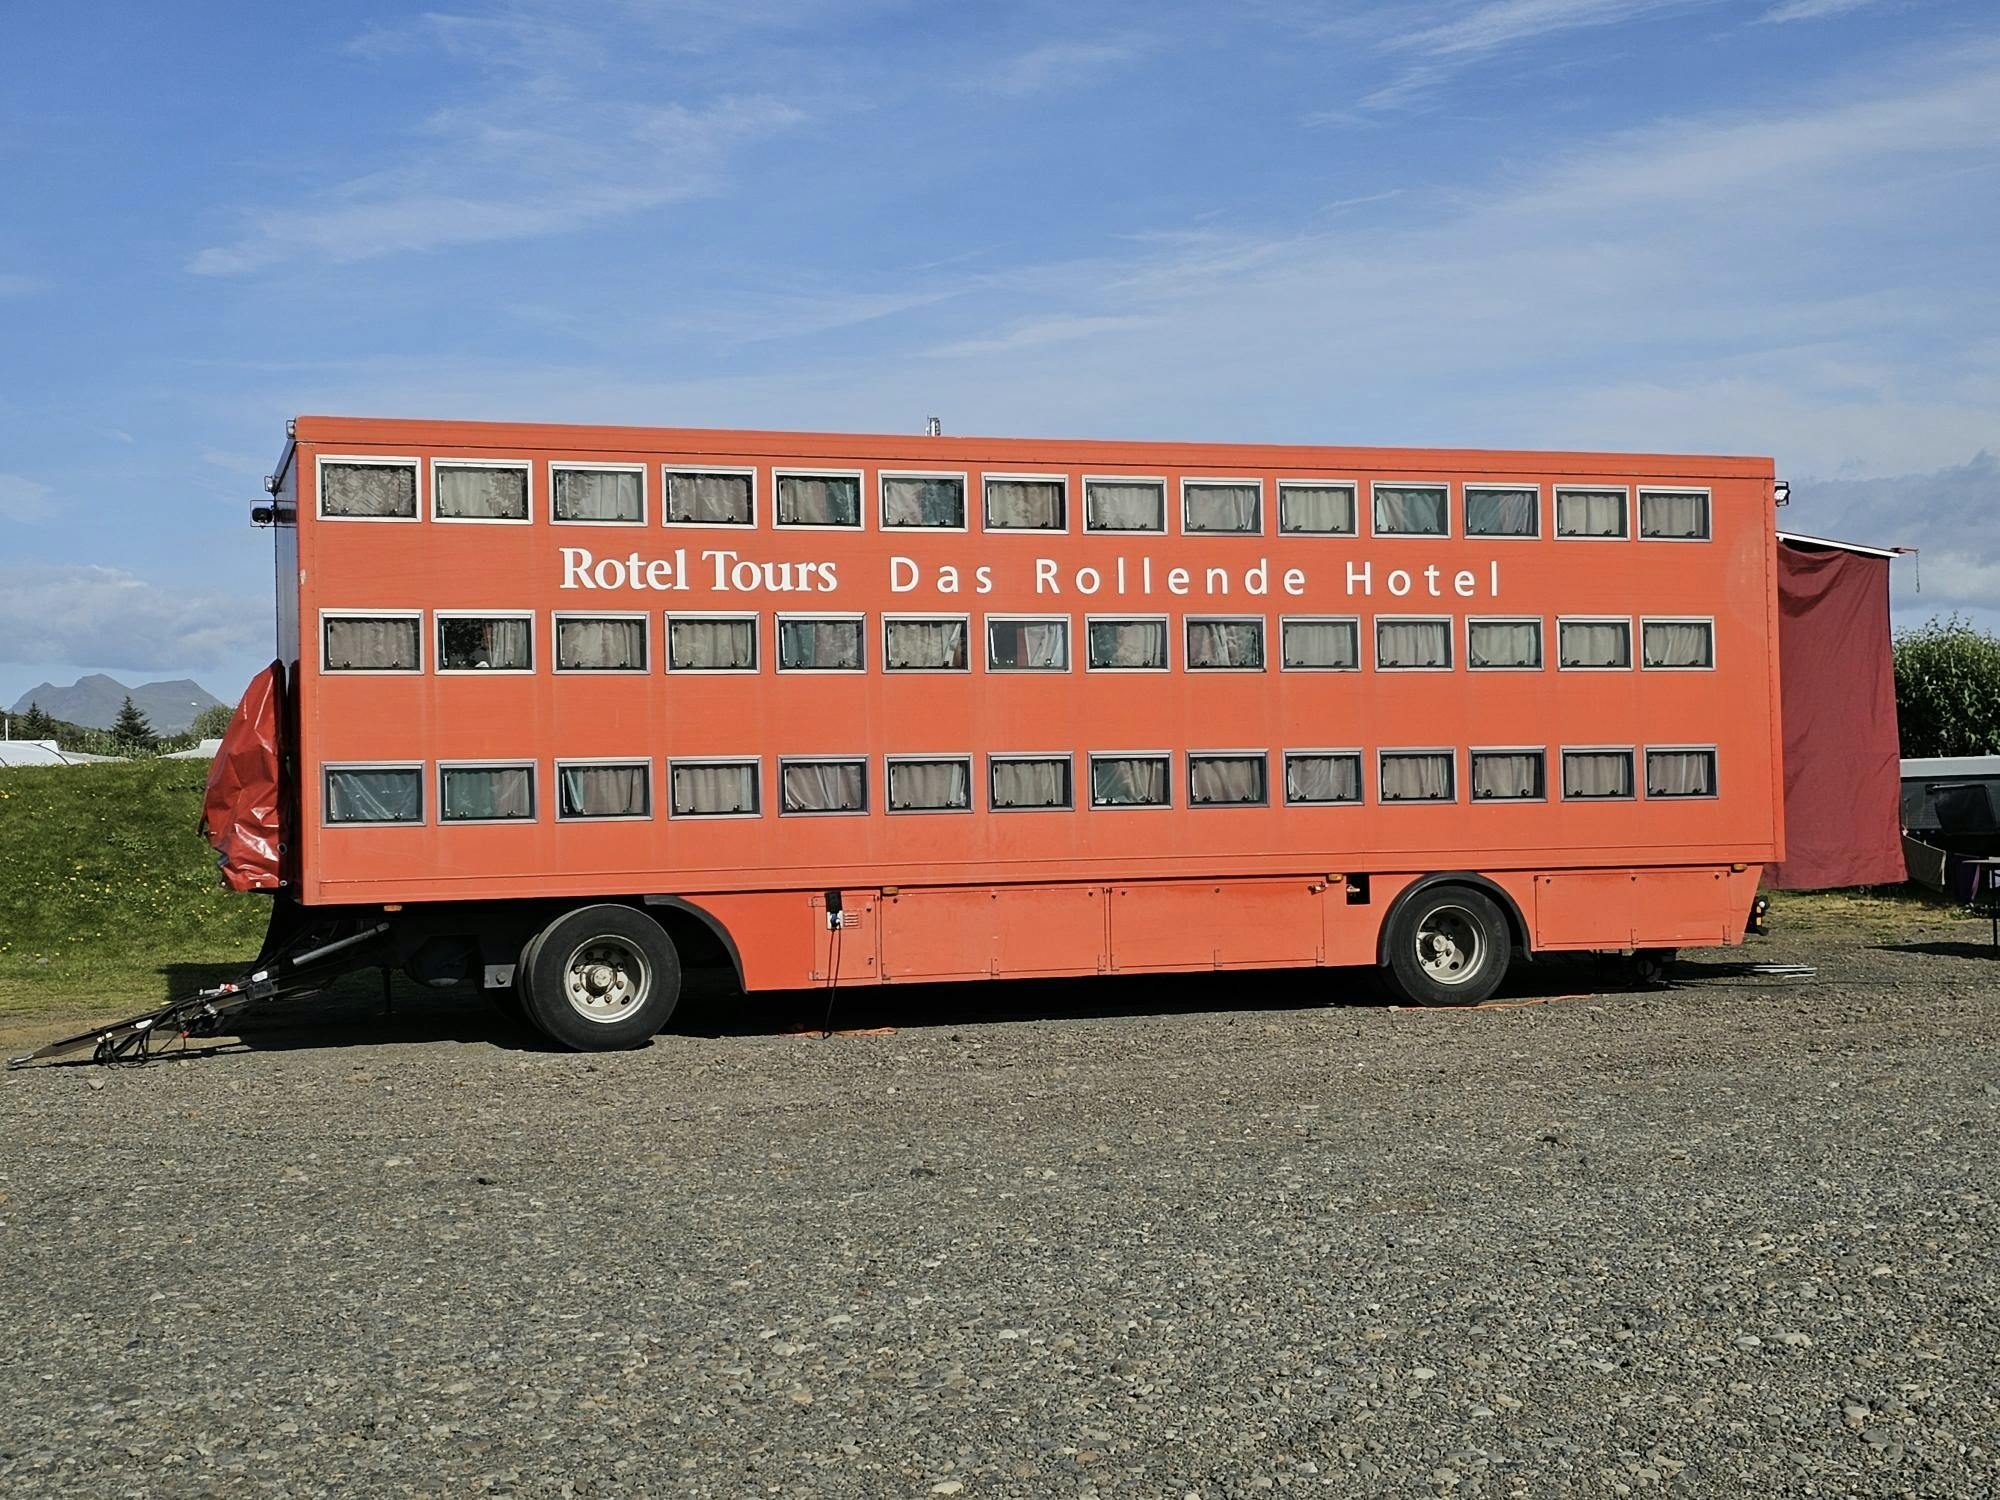 Iceland Tractor Trailer hotel on wheels